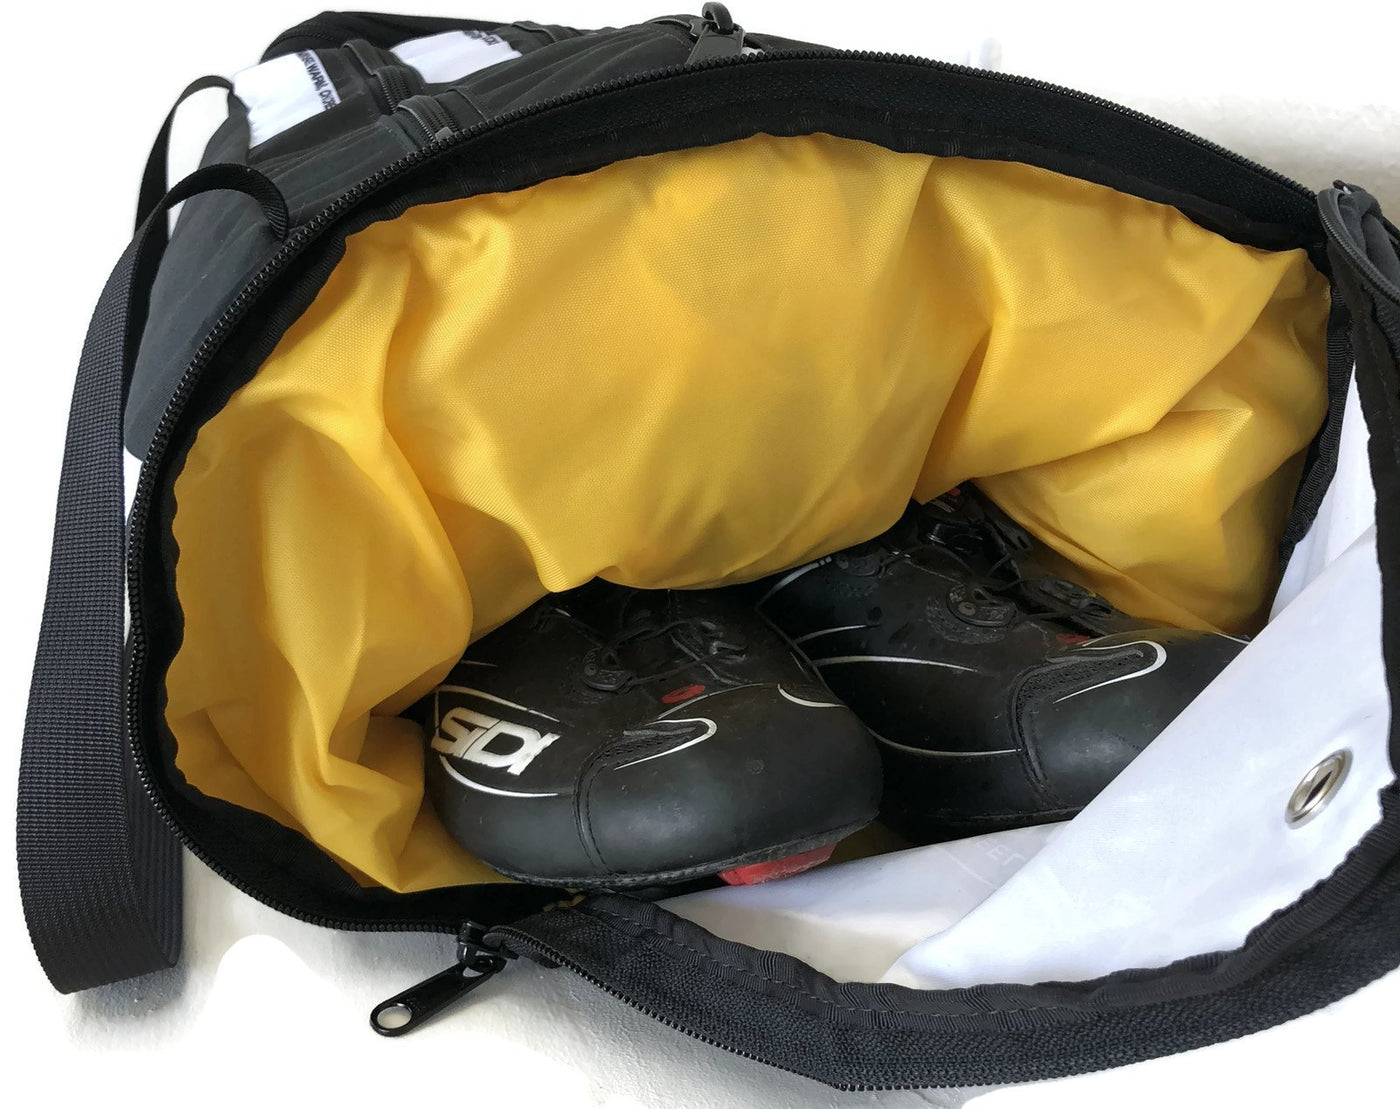 Cycling Adventures and more 2019 RACEDAY BAG